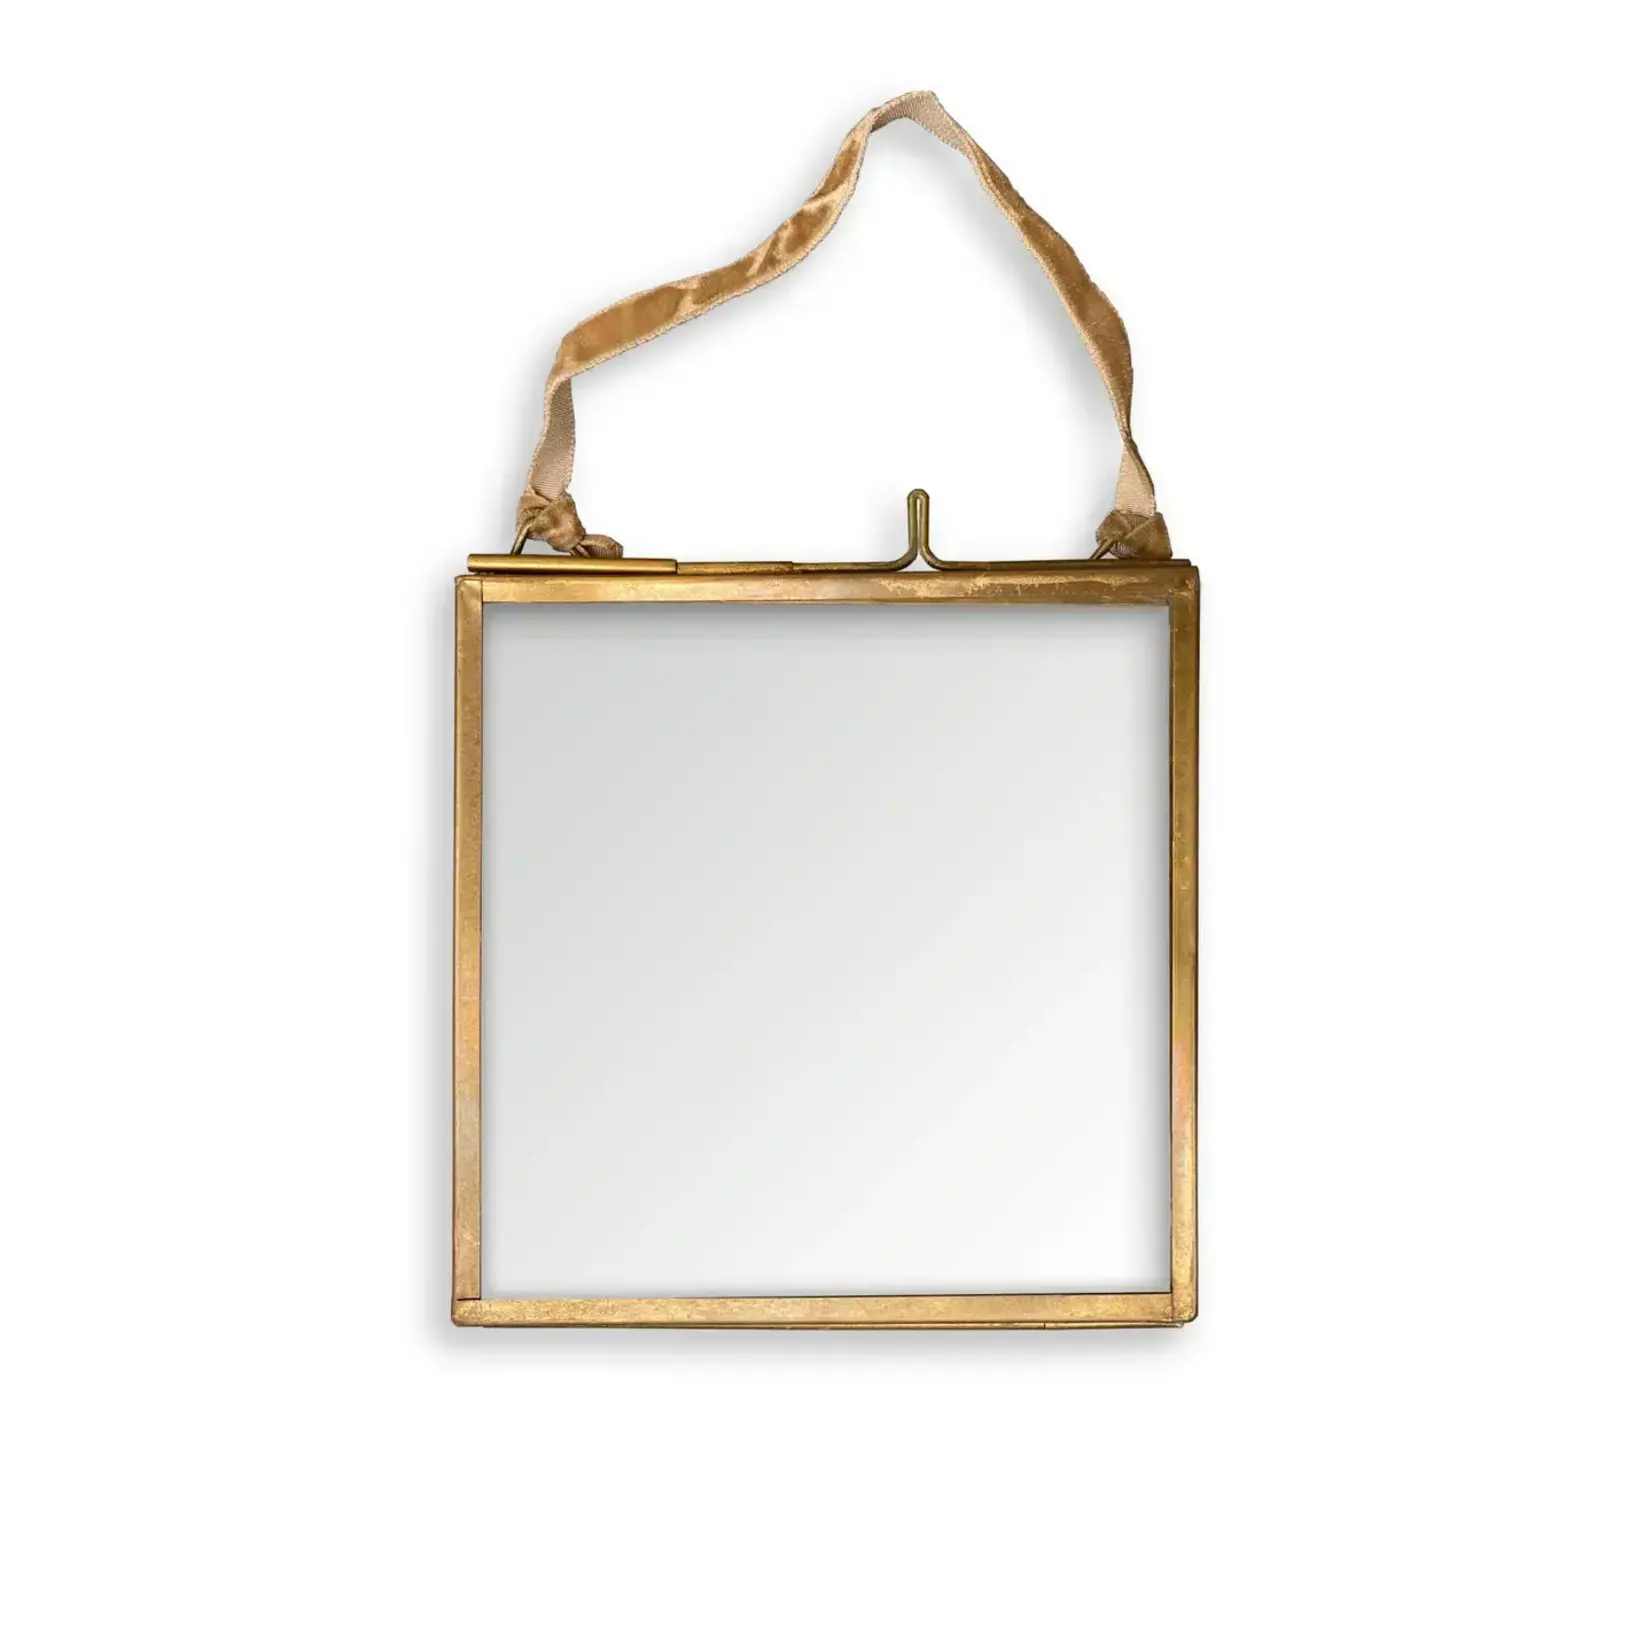 French Graffiti Brass and Glass Ornament  Photo Frame 3"x3"